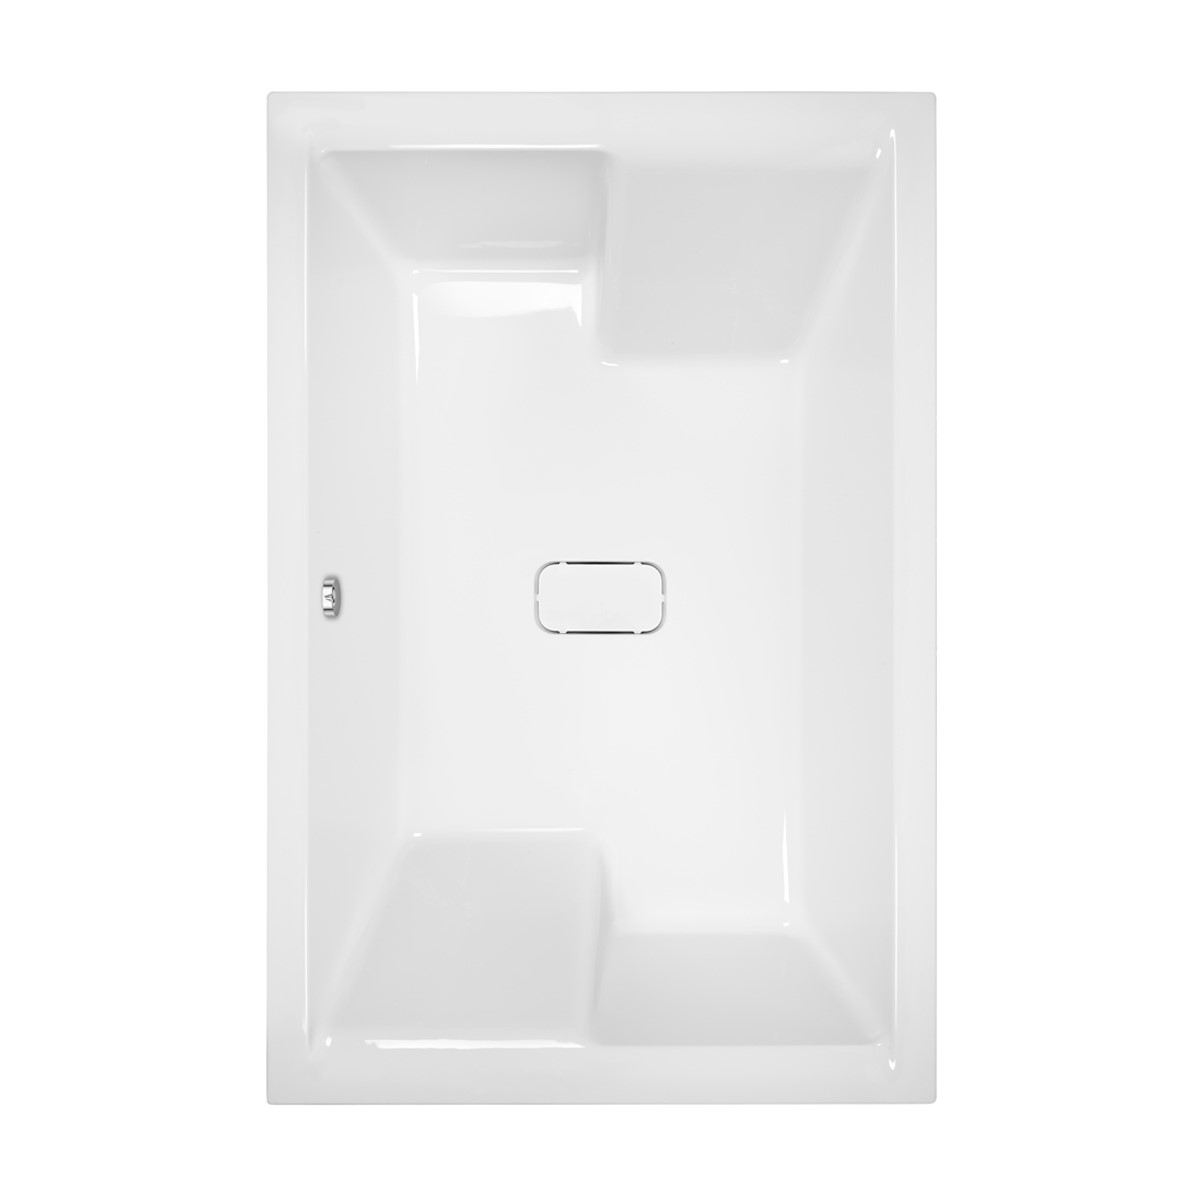 Amare Double Ended Superdeep Inset Bath White 1800 x 1200mm